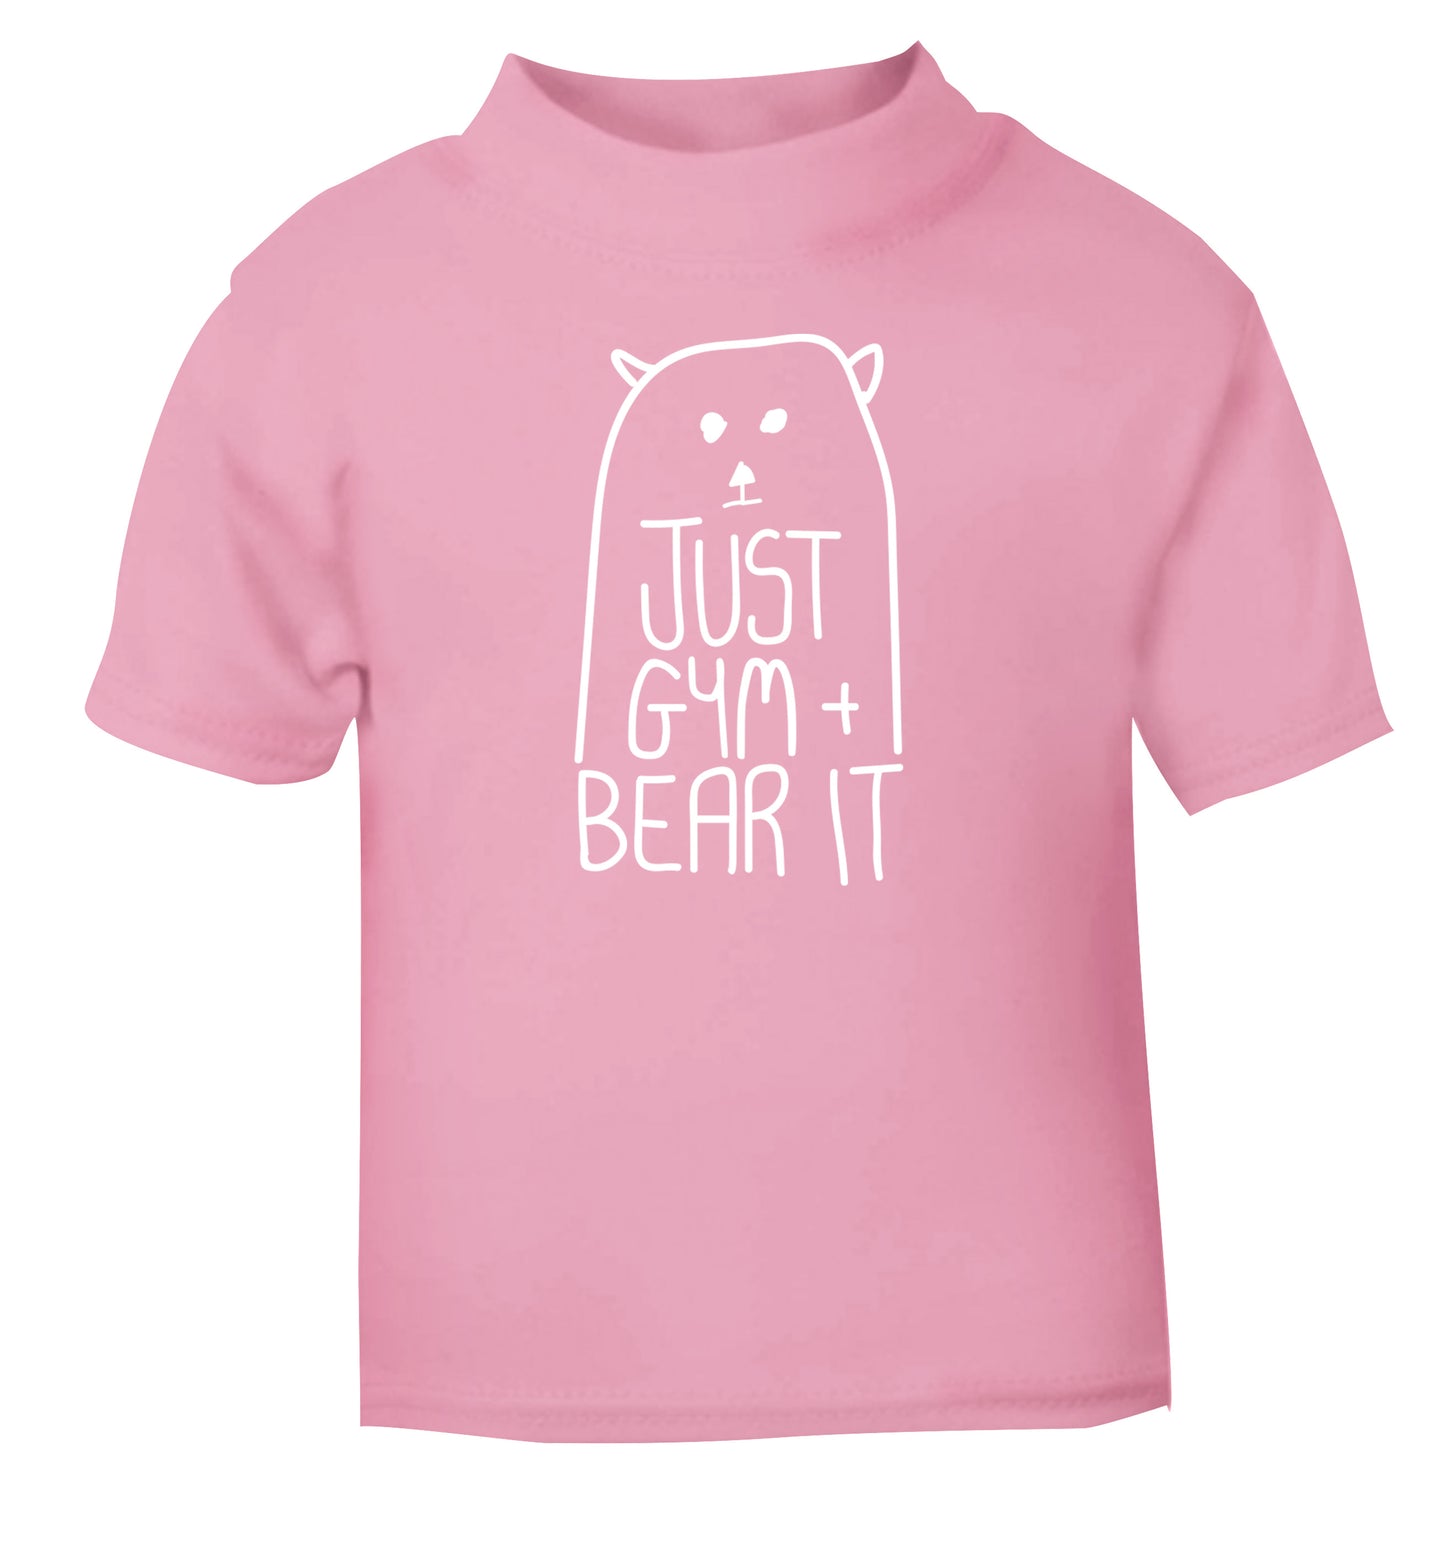 Just gym and bear it light pink Baby Toddler Tshirt 2 Years